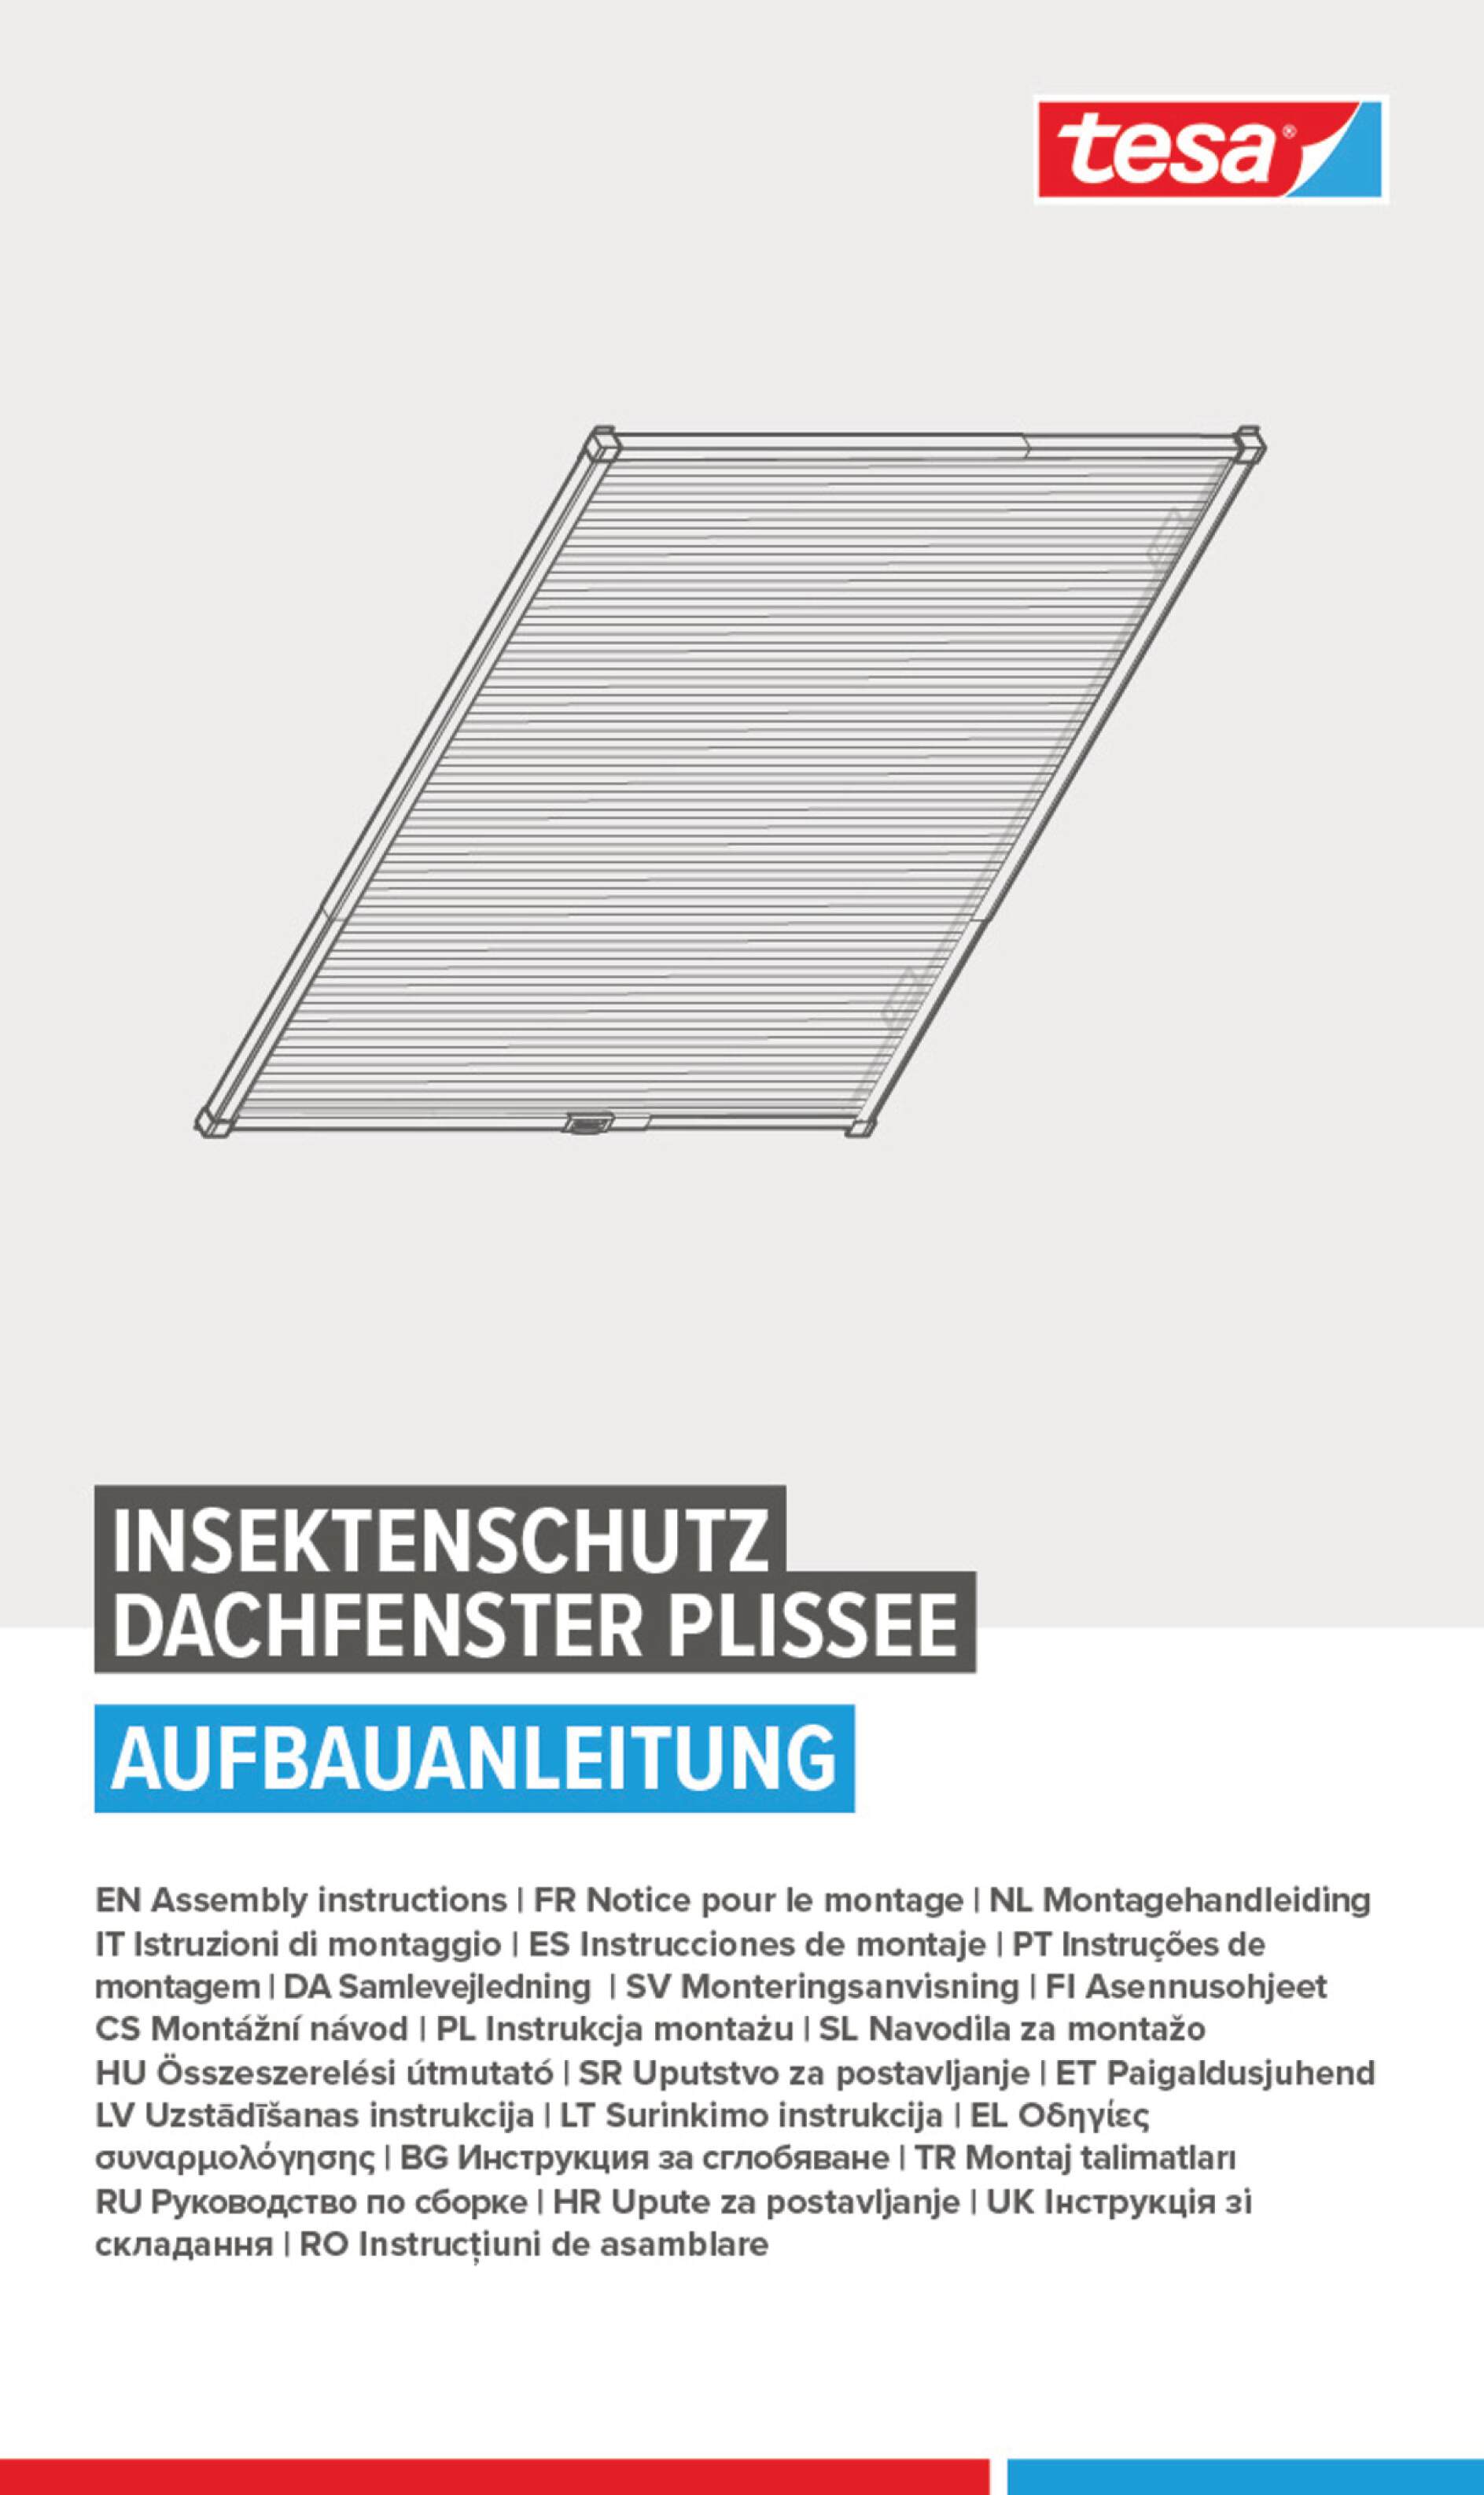 tesa® Insect Stop Pleated Alu Insect Screen For Roof Windows